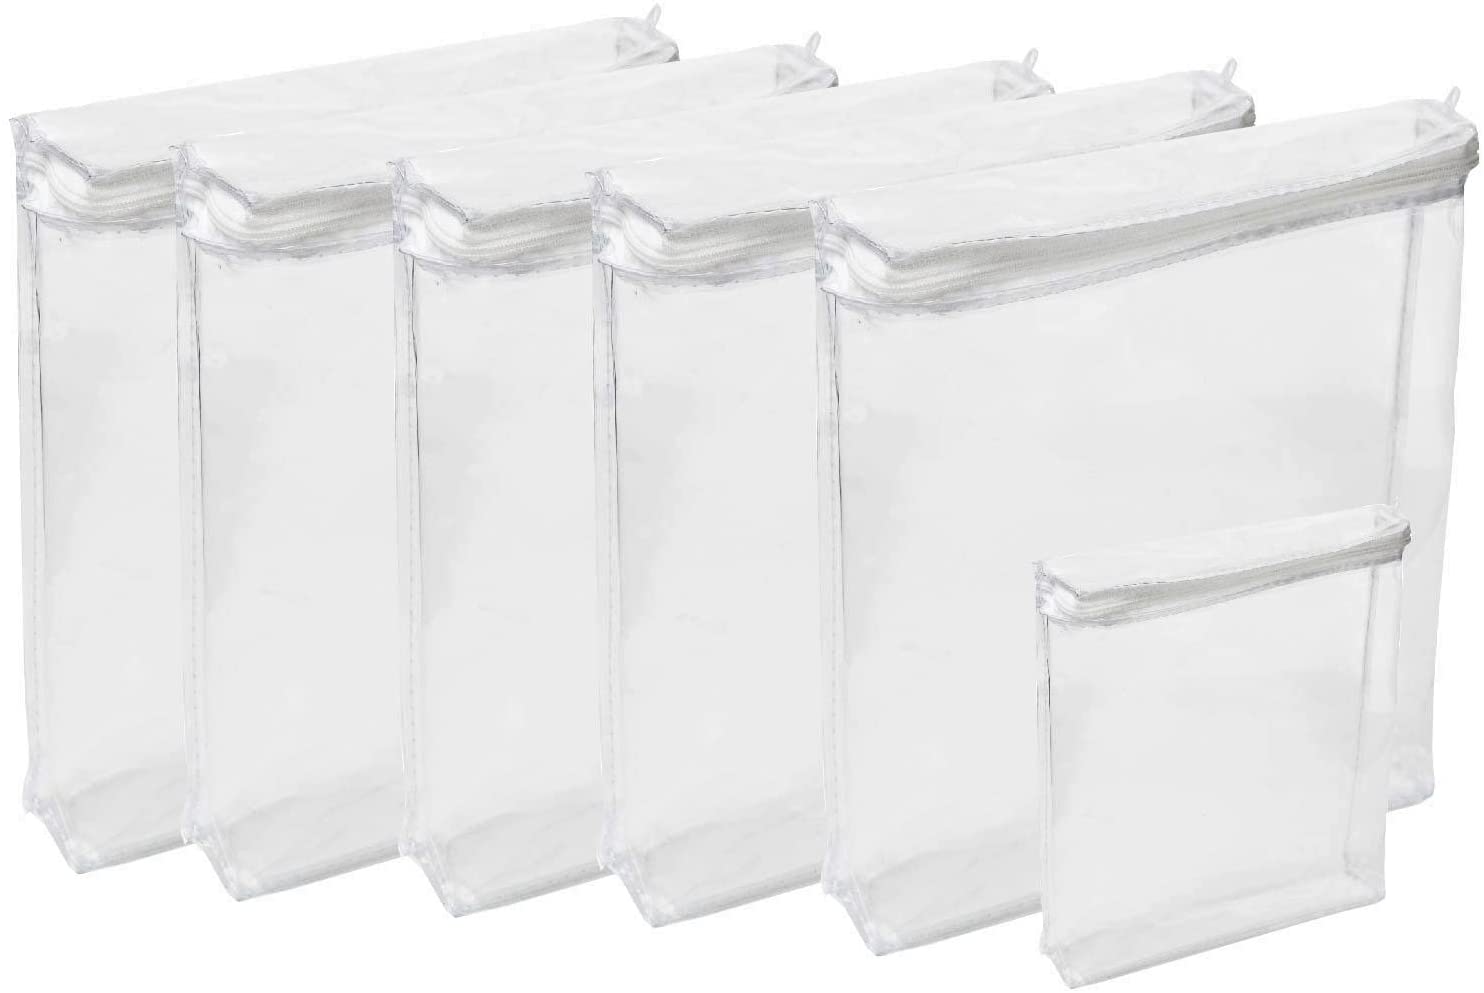 Amazon.com: 12 Pcs Clear Vinyl Zippered Storage Bags 15.8 x 13.8 x 4 Inch  Sweater Storage Bags Plastic with Zipper Moth Proof Bed Sheet Organizer for  Blankets Clothes Closet Sweater Quilt Pillow :